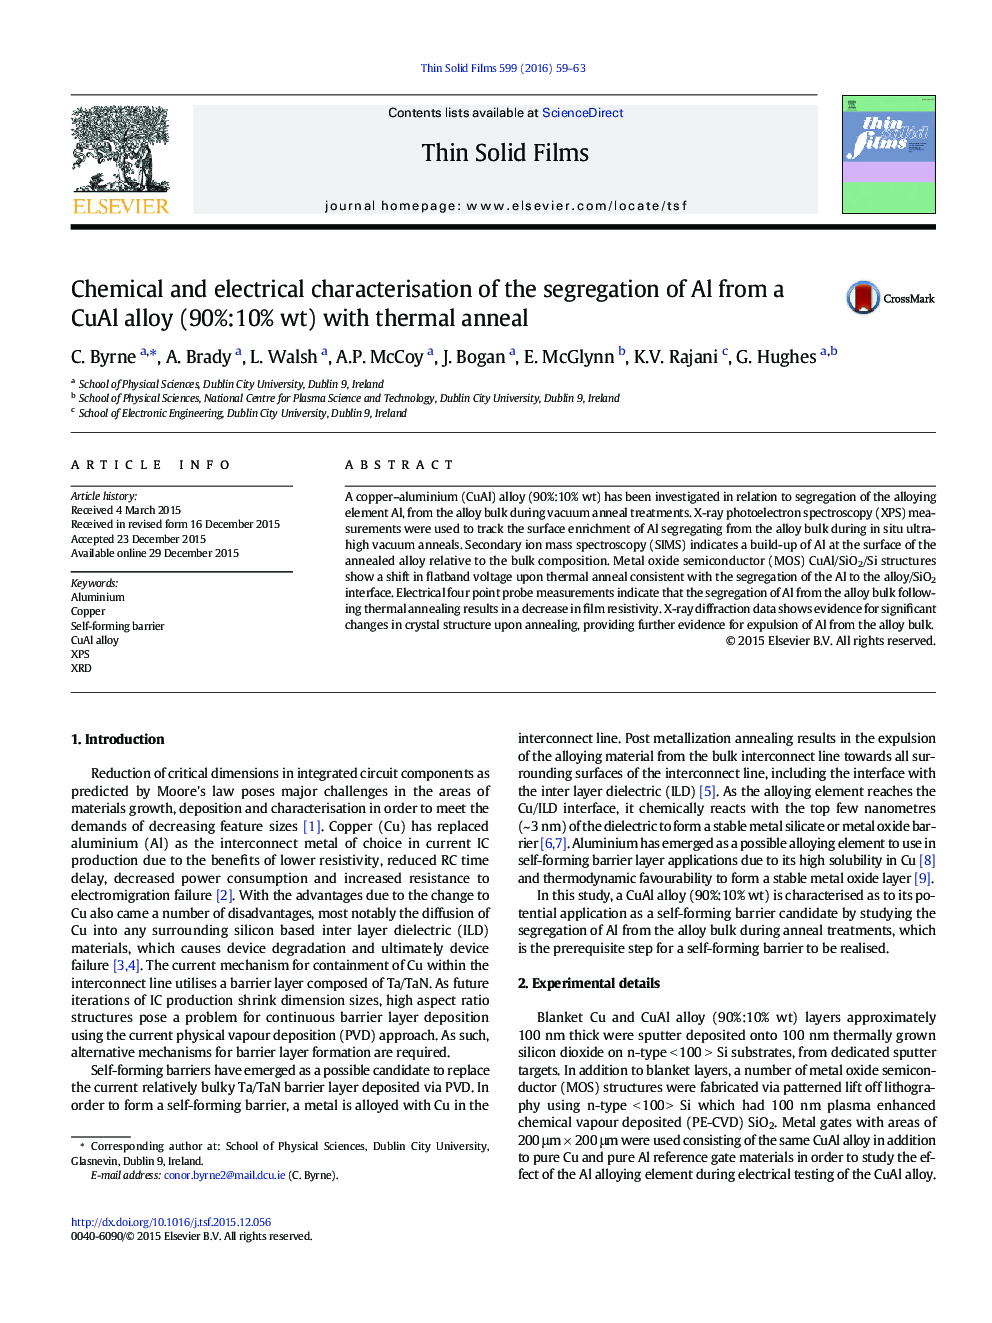 Chemical and electrical characterisation of the segregation of Al from a CuAl alloy (90%:10% wt) with thermal anneal